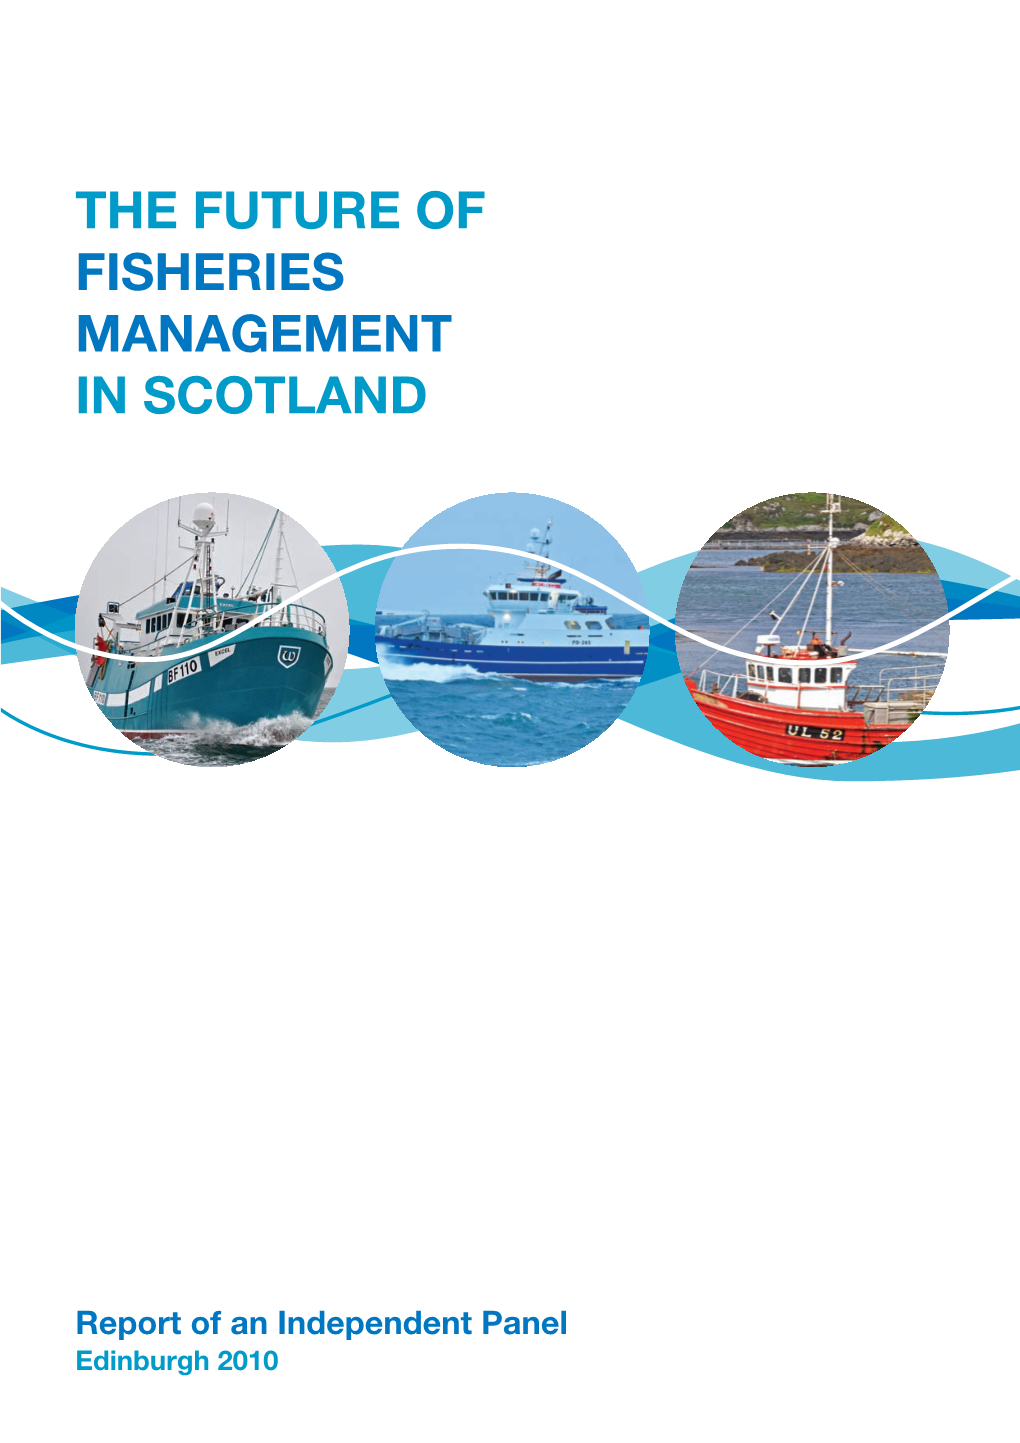 The Future of Fisheries Management in Scotland the Future of Fisheries Management in Scotland